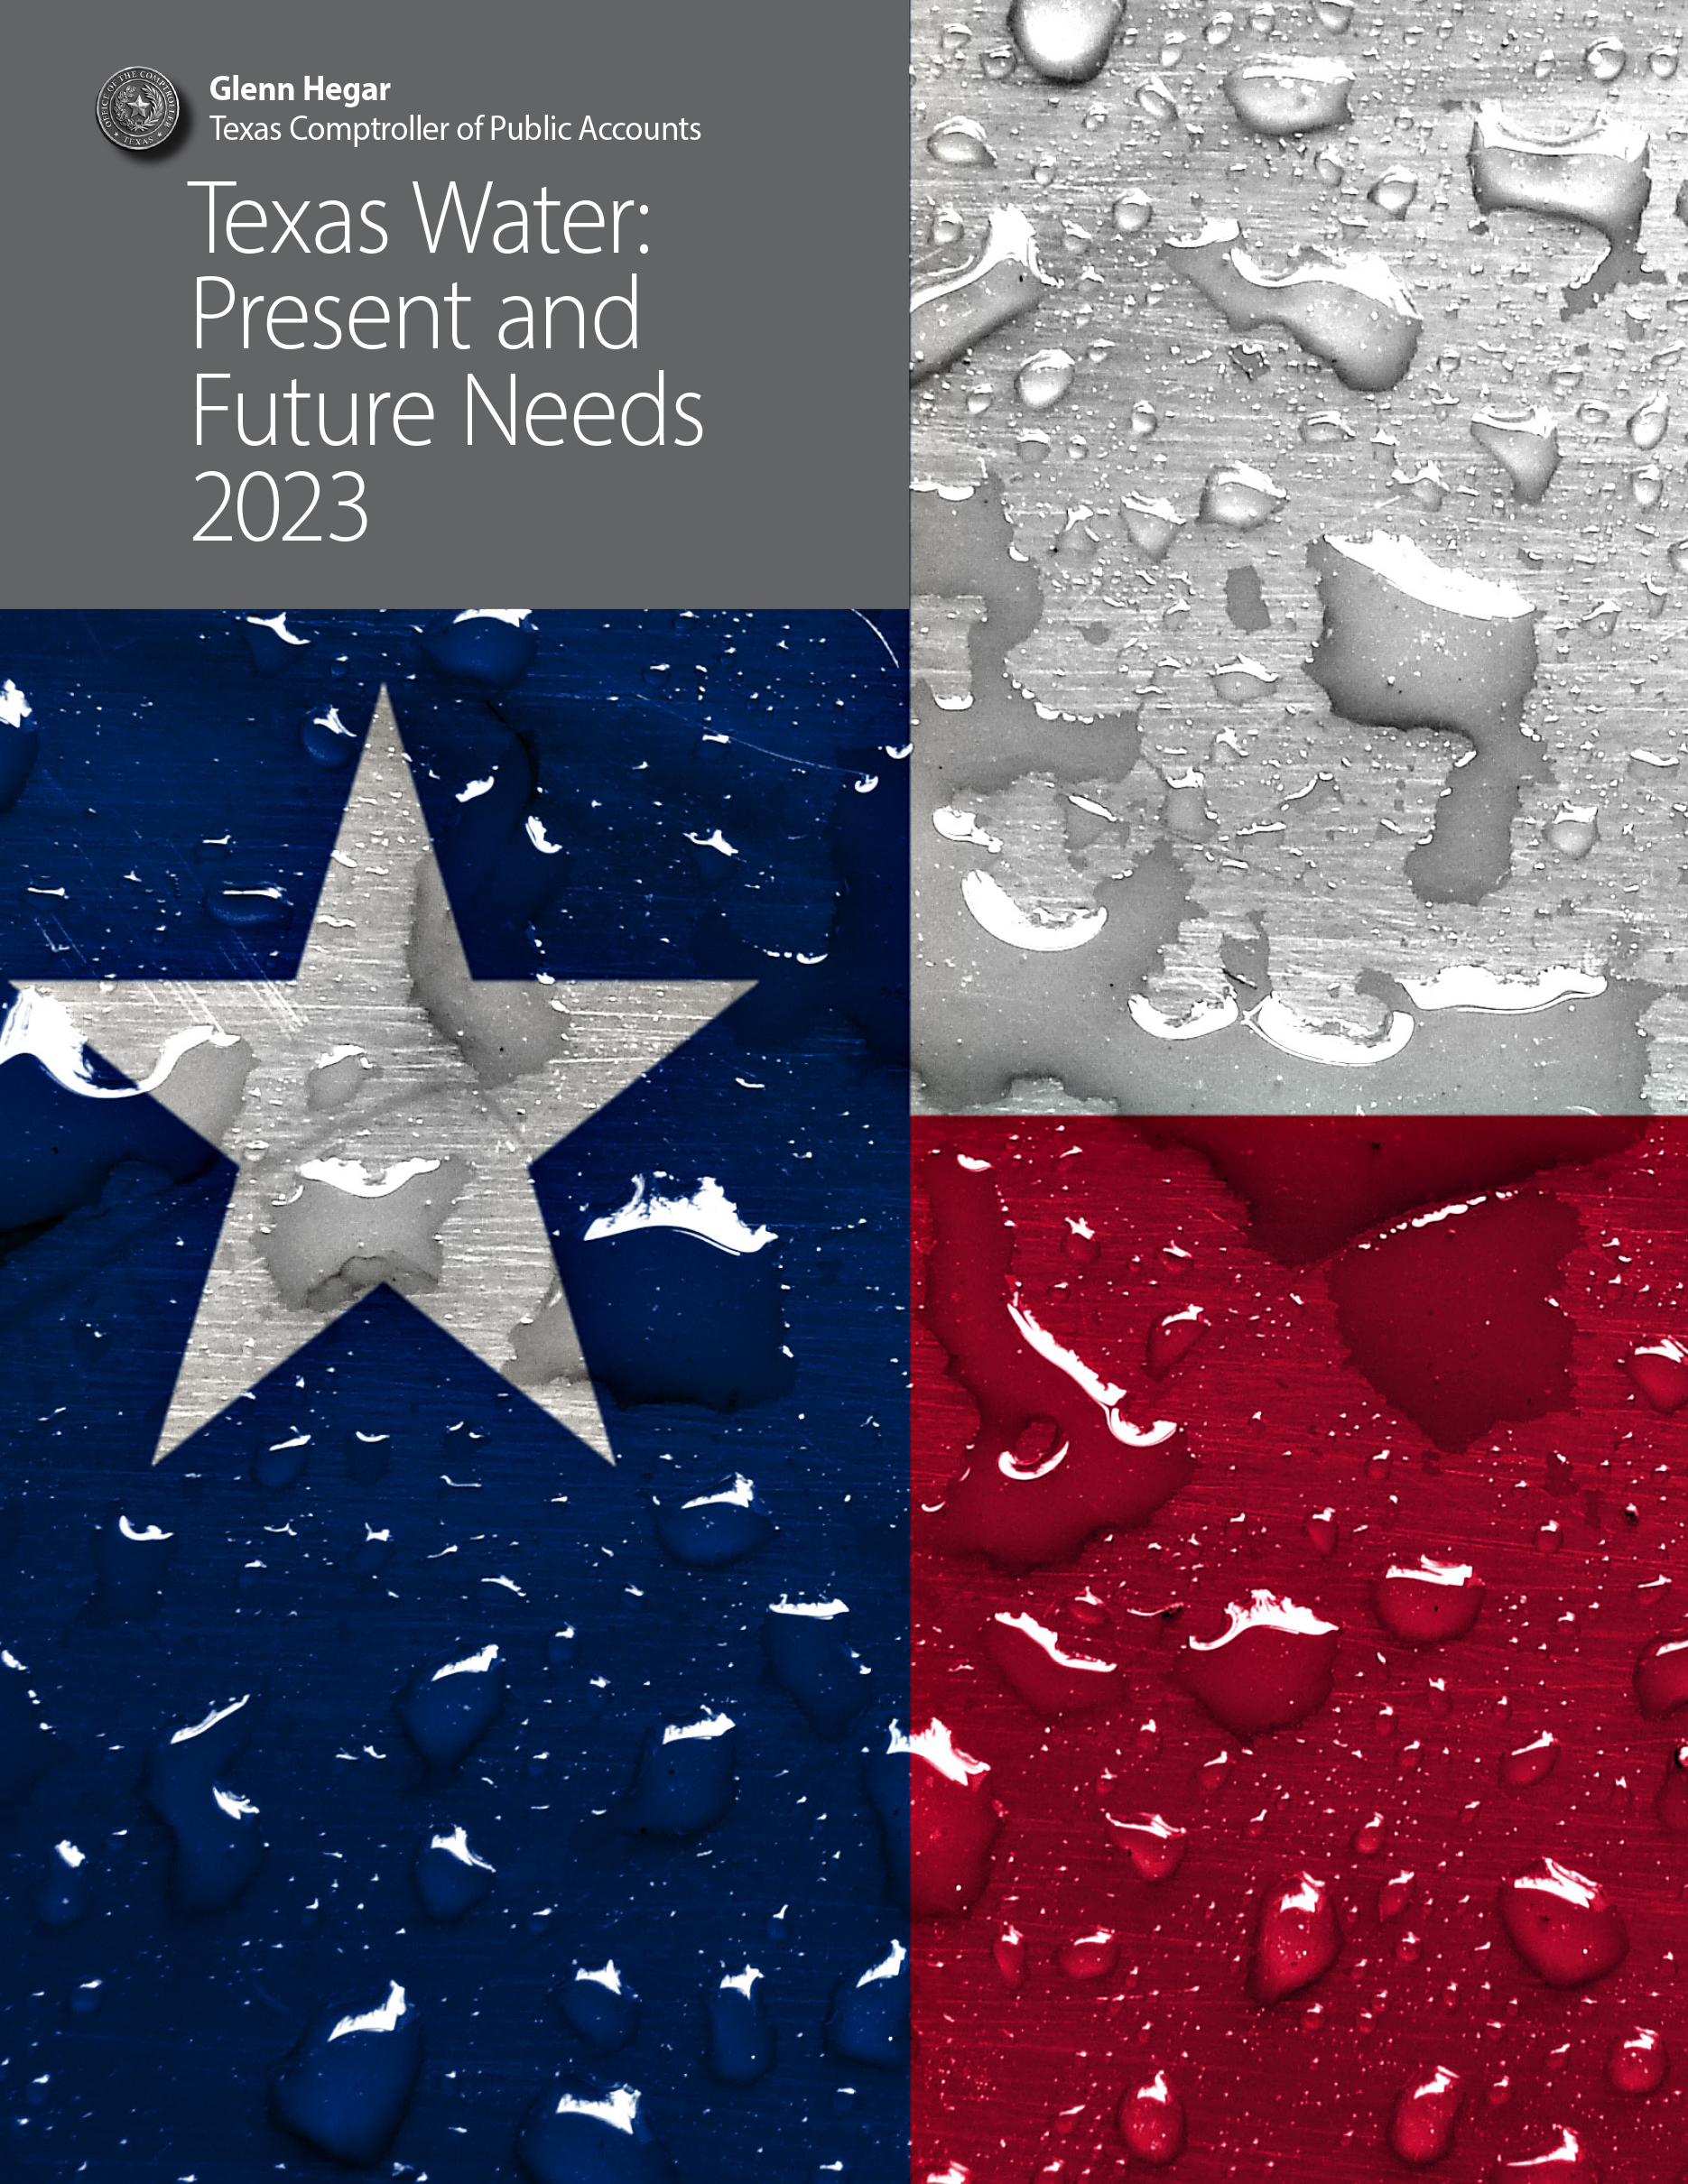 Texas Water: Present and Future Needs 2023